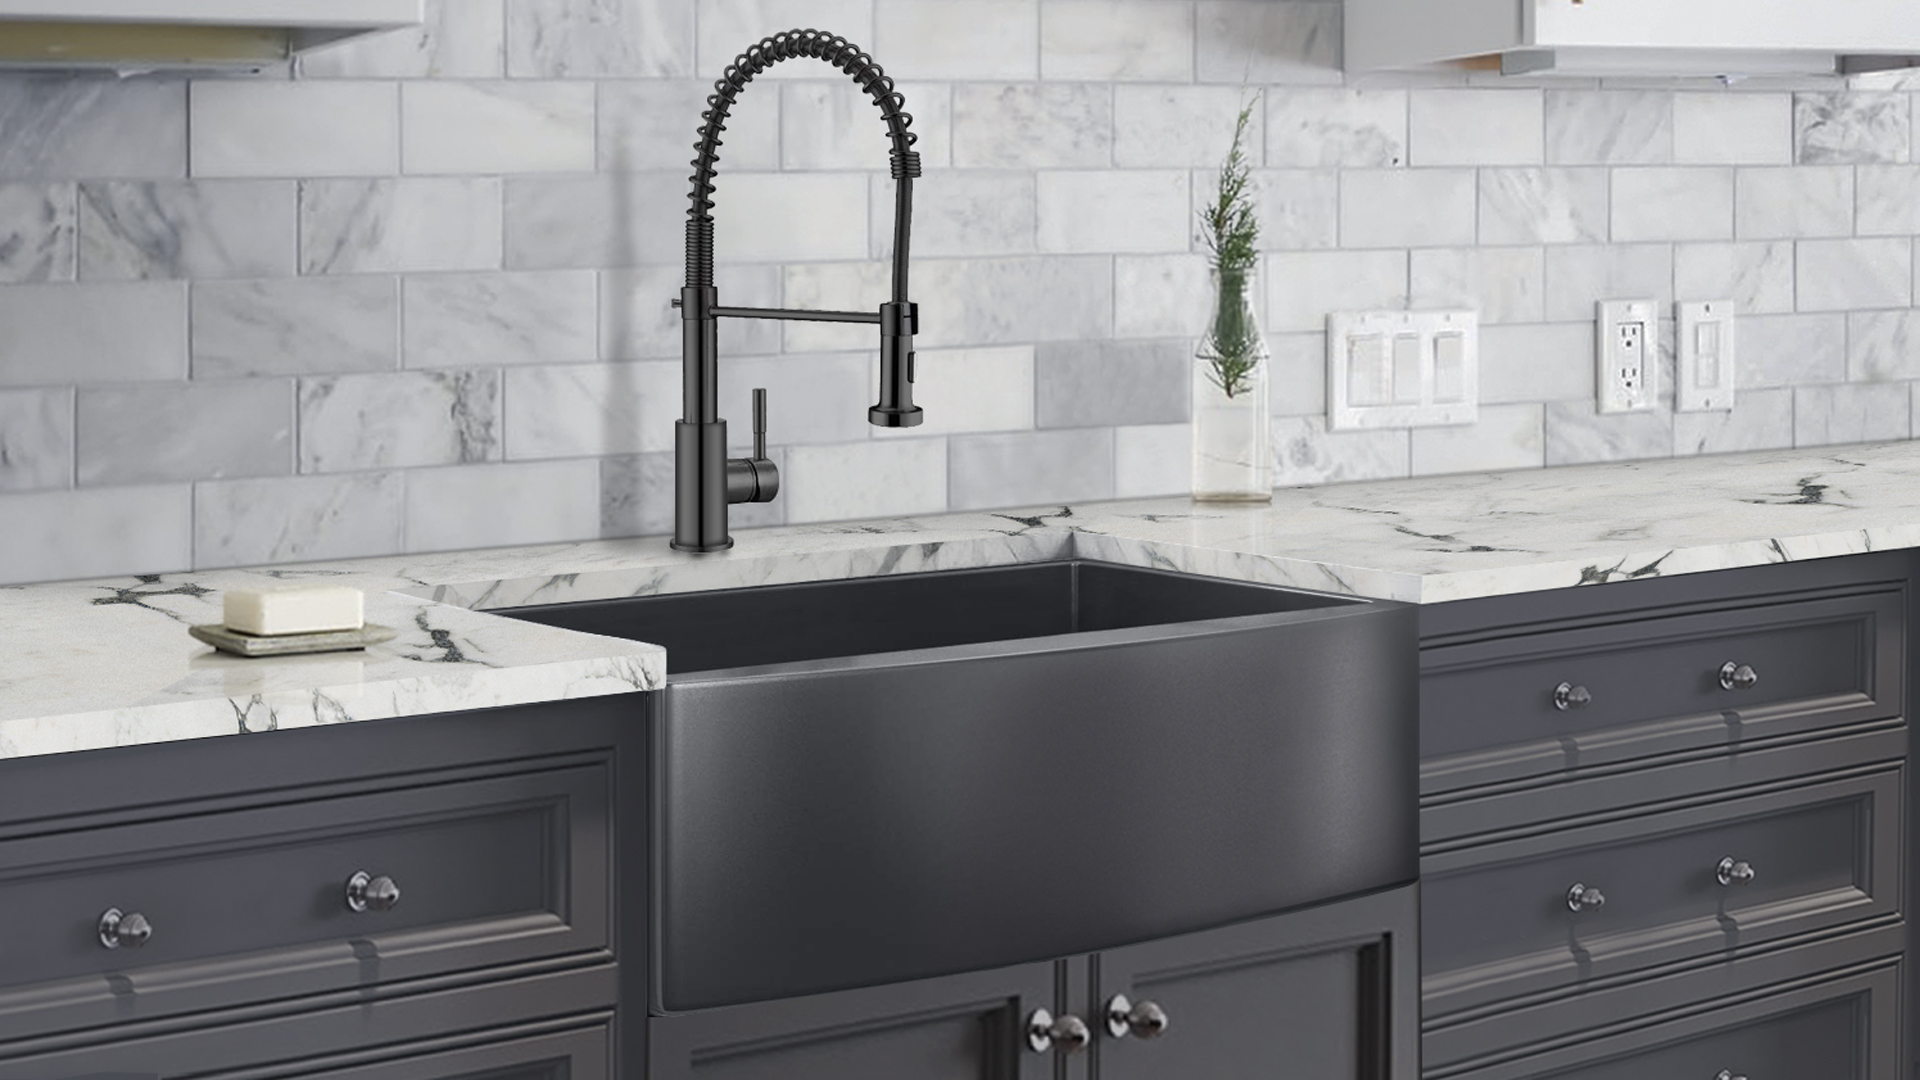 Available Polished Centerset Faucet